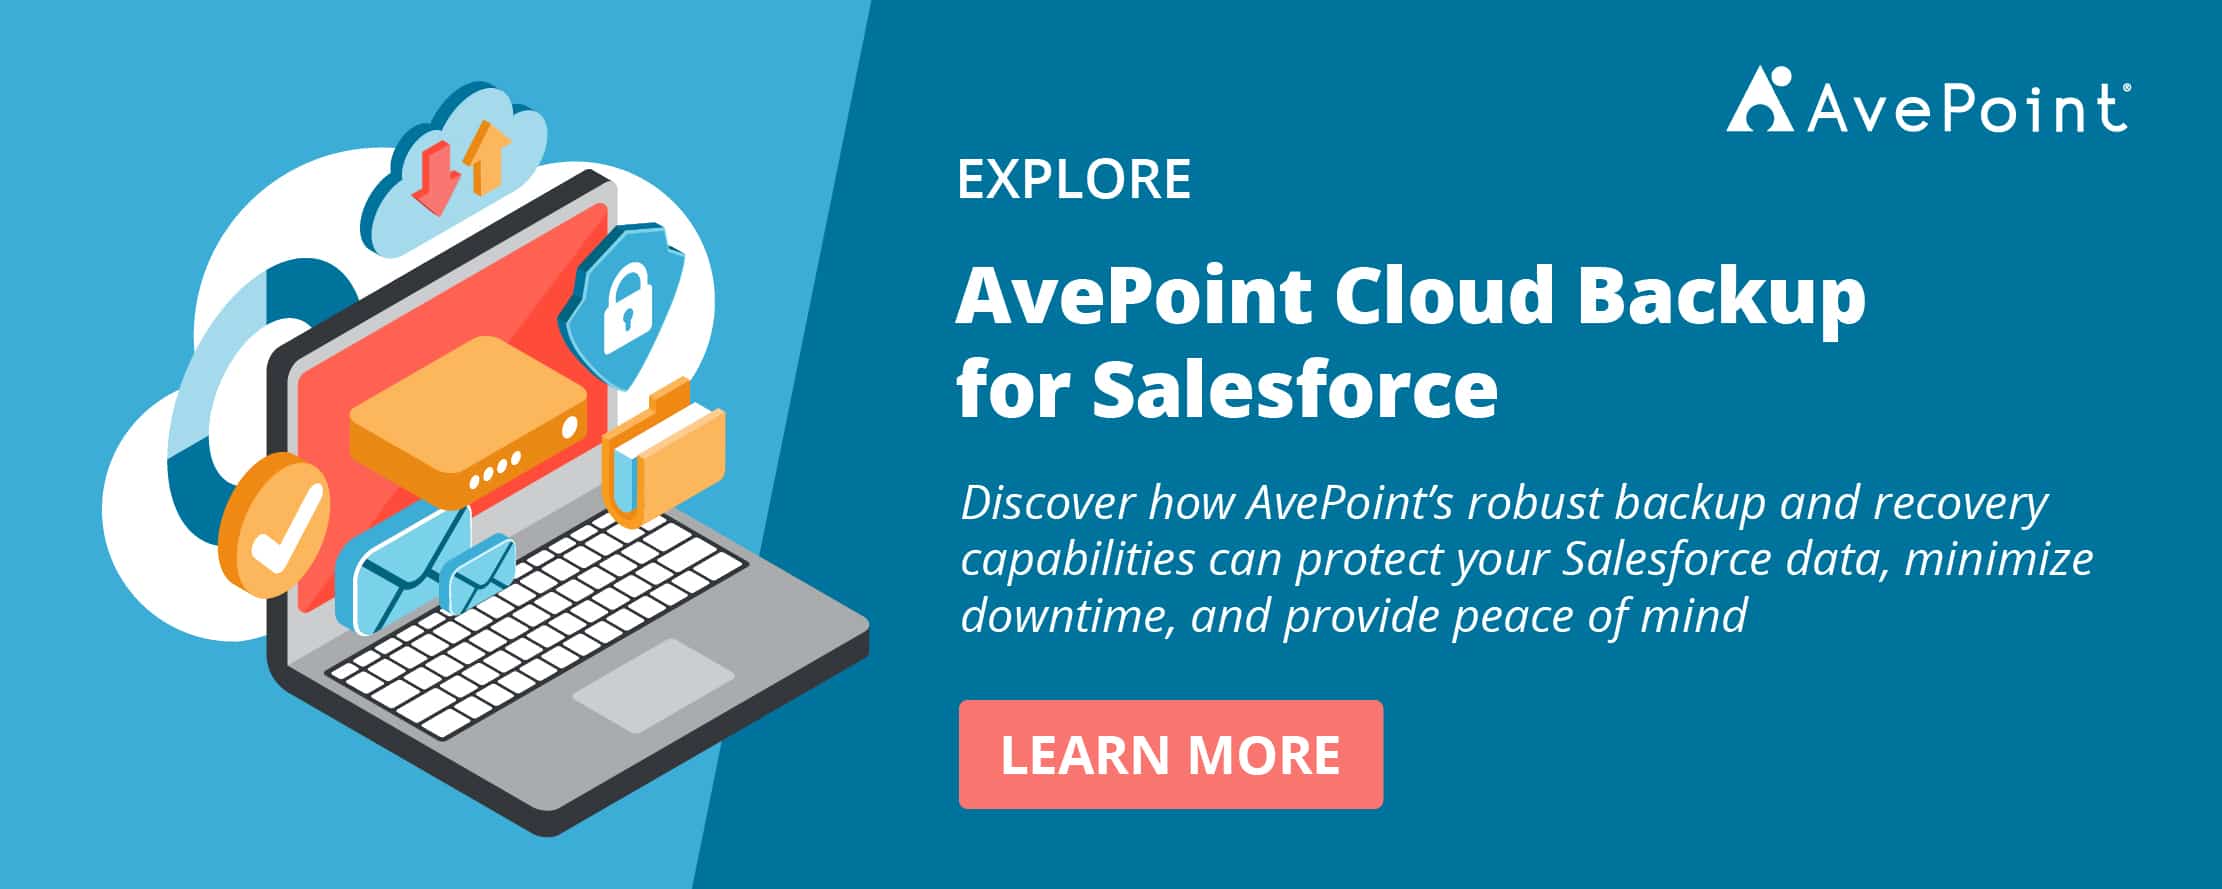 AvePoint Cloud Backup for Salesforce_2_800x320px